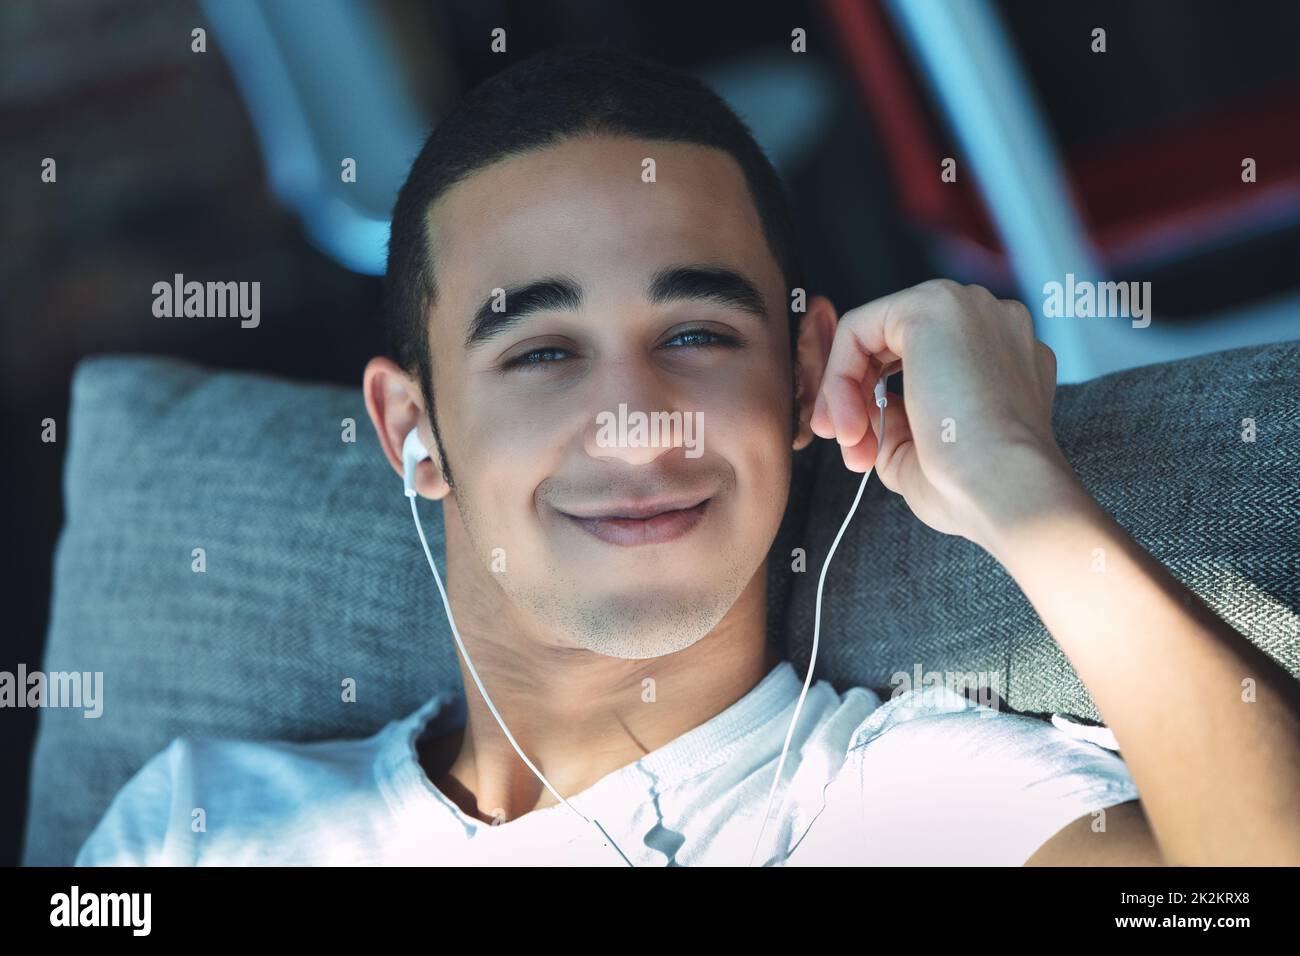 Smiling young Black man with unshaven stubble listening to music Stock Photo